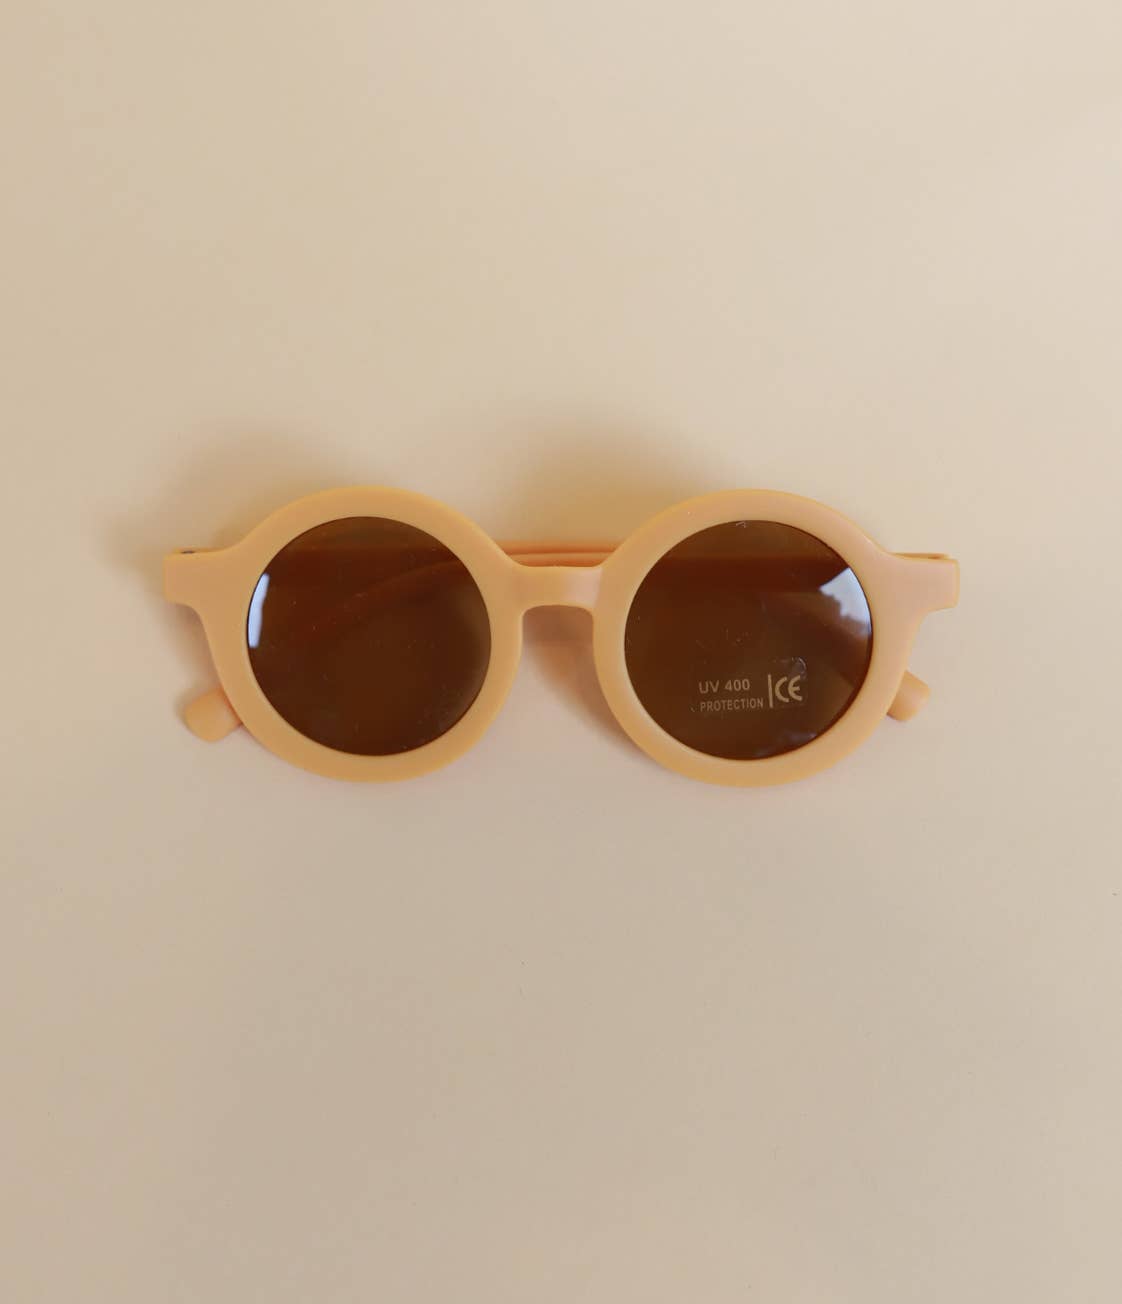 Polished Prints - Round Sunglasses for Toddler, UV400